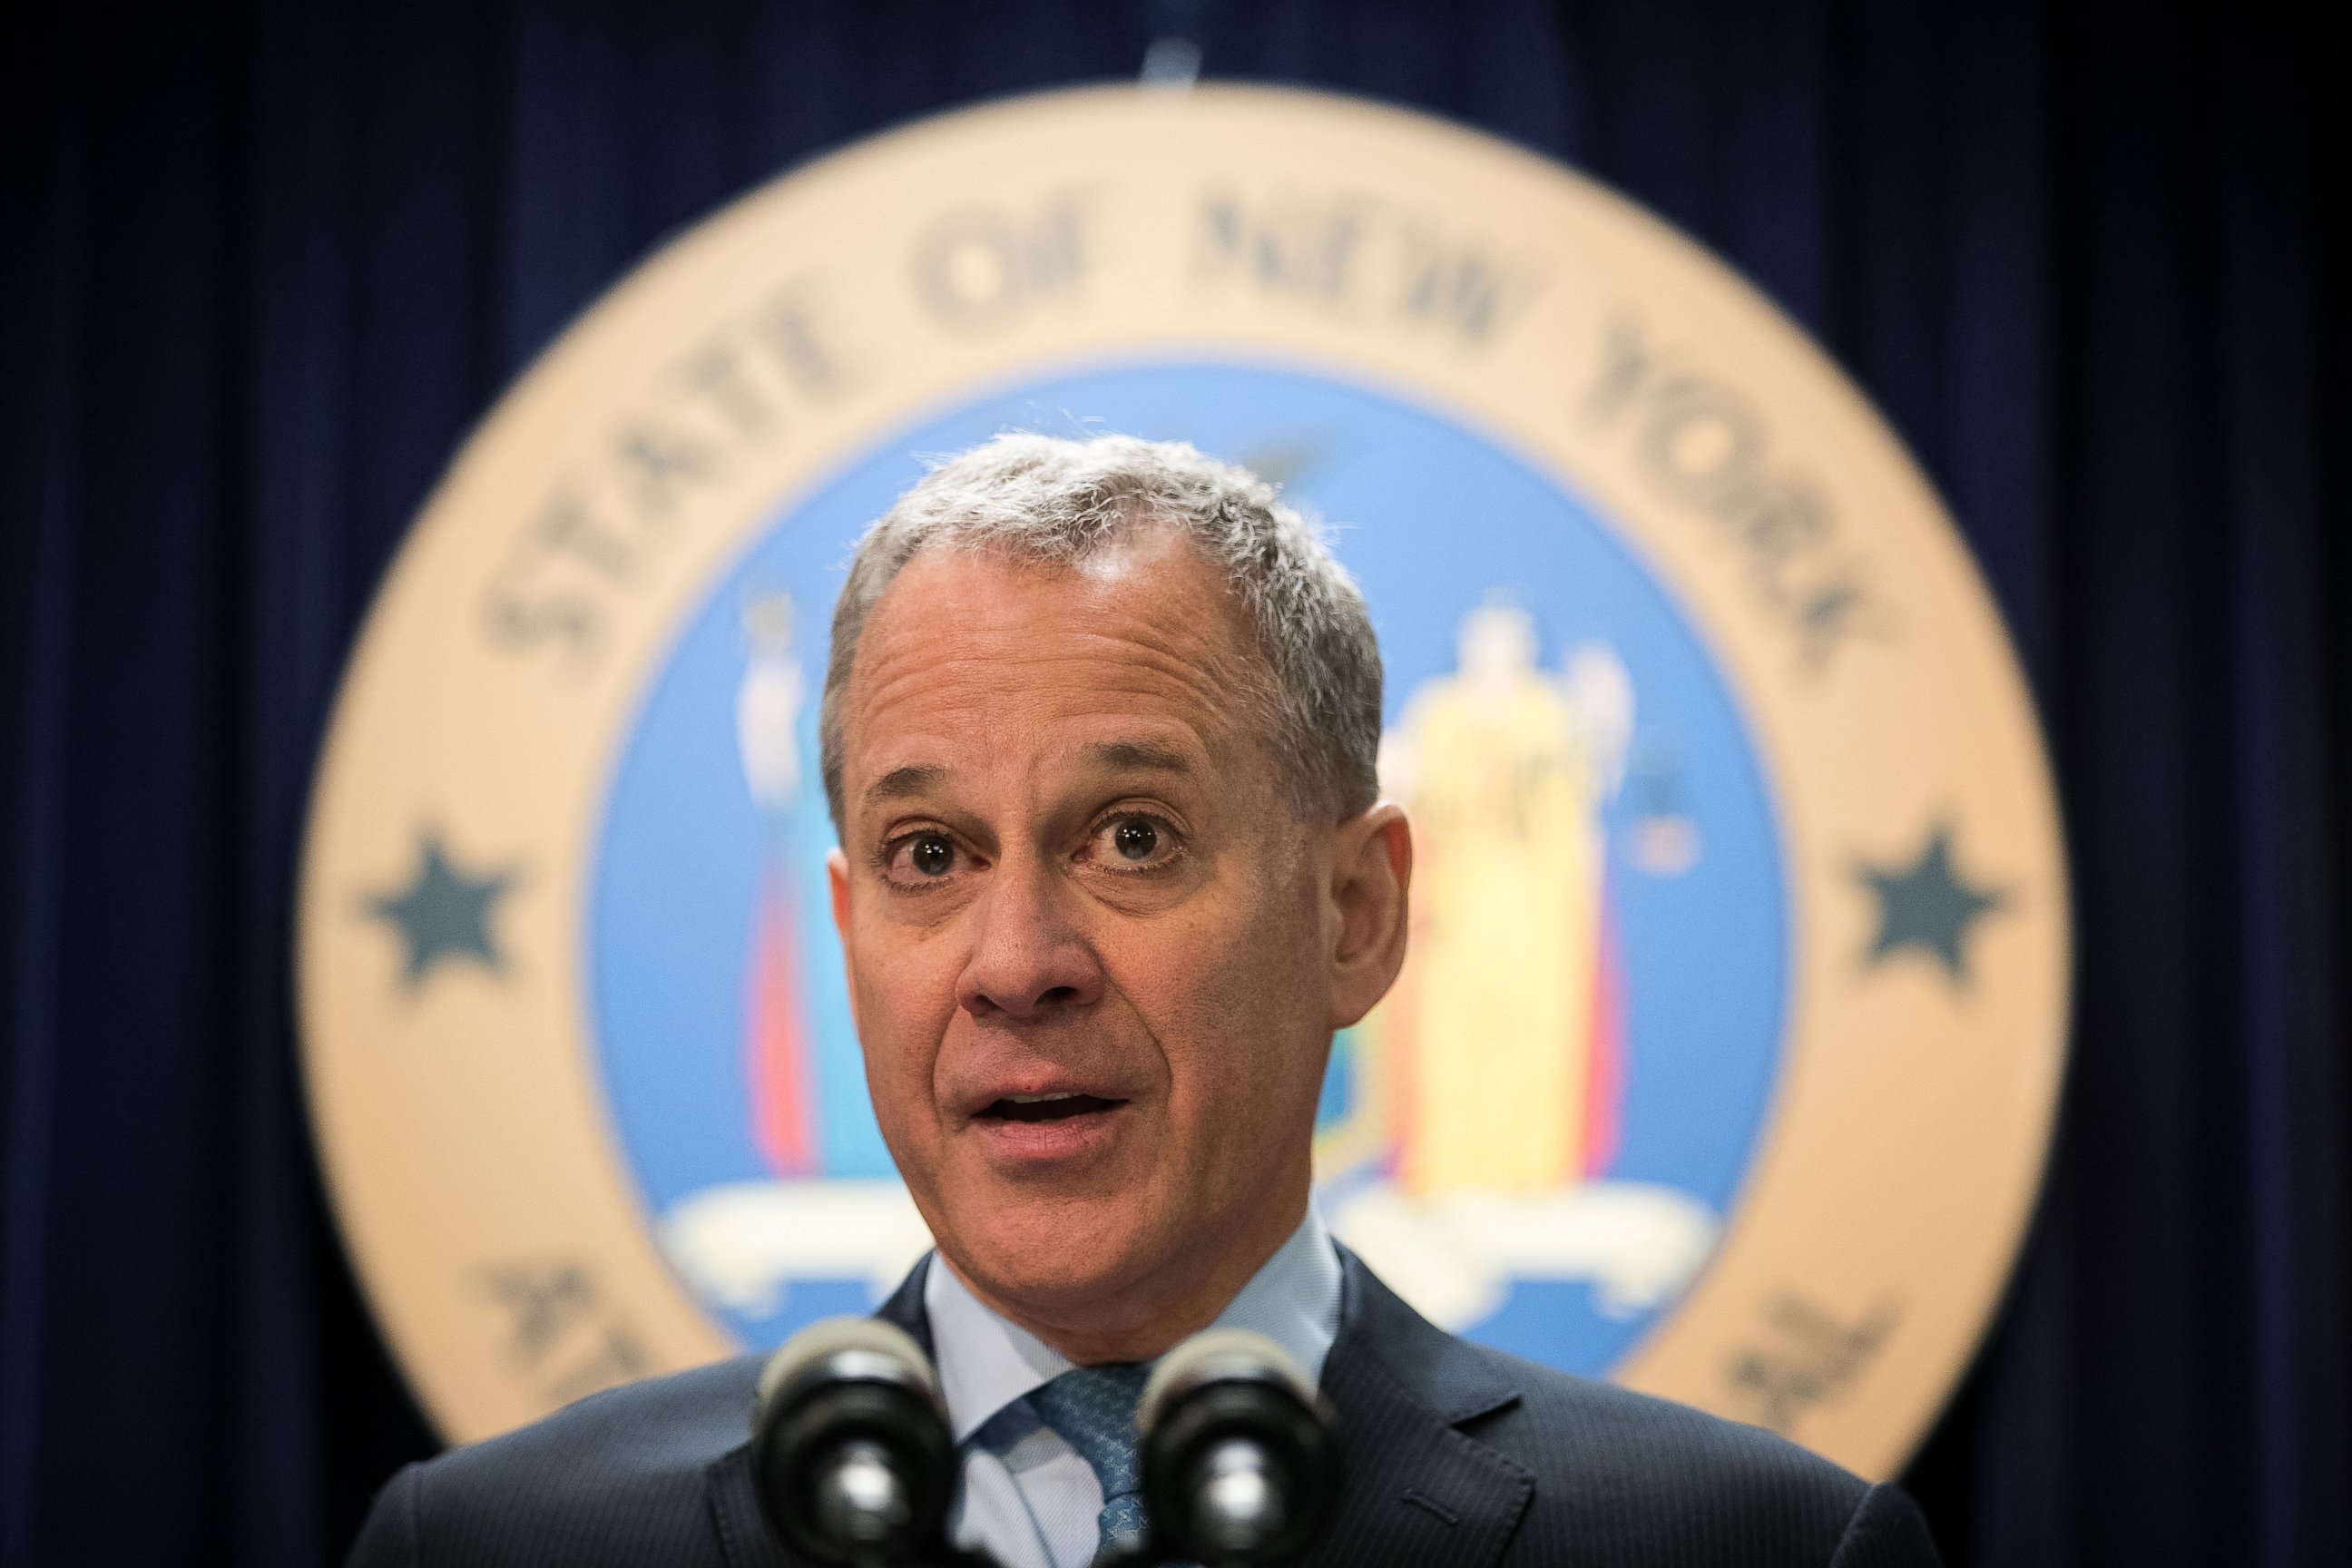 PHOTO: New York Attorney General Eric Schneiderman speaks during a press conference at the office of the New York Attorney General, Sept. 13, 2016, in New York.